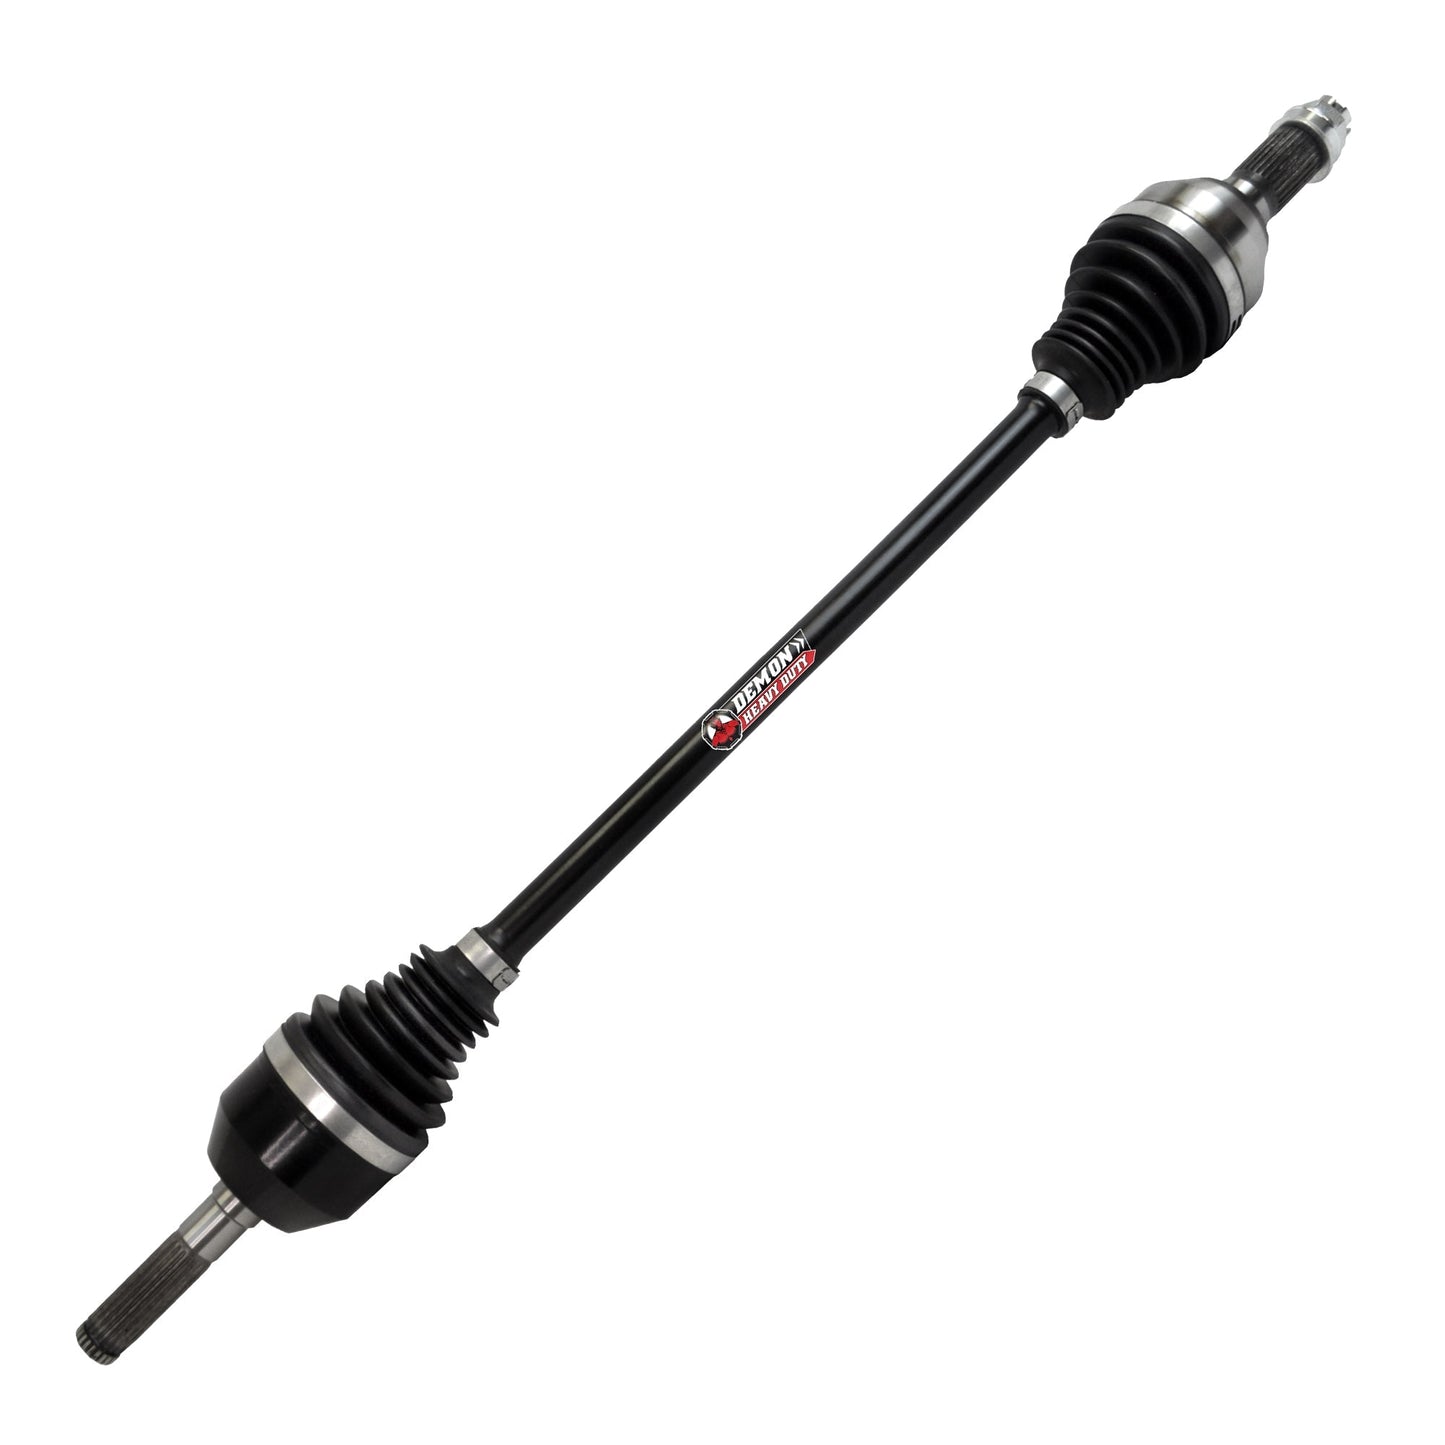 Demon Heavy Duty Rear Axle Replacement for Can-Am X3